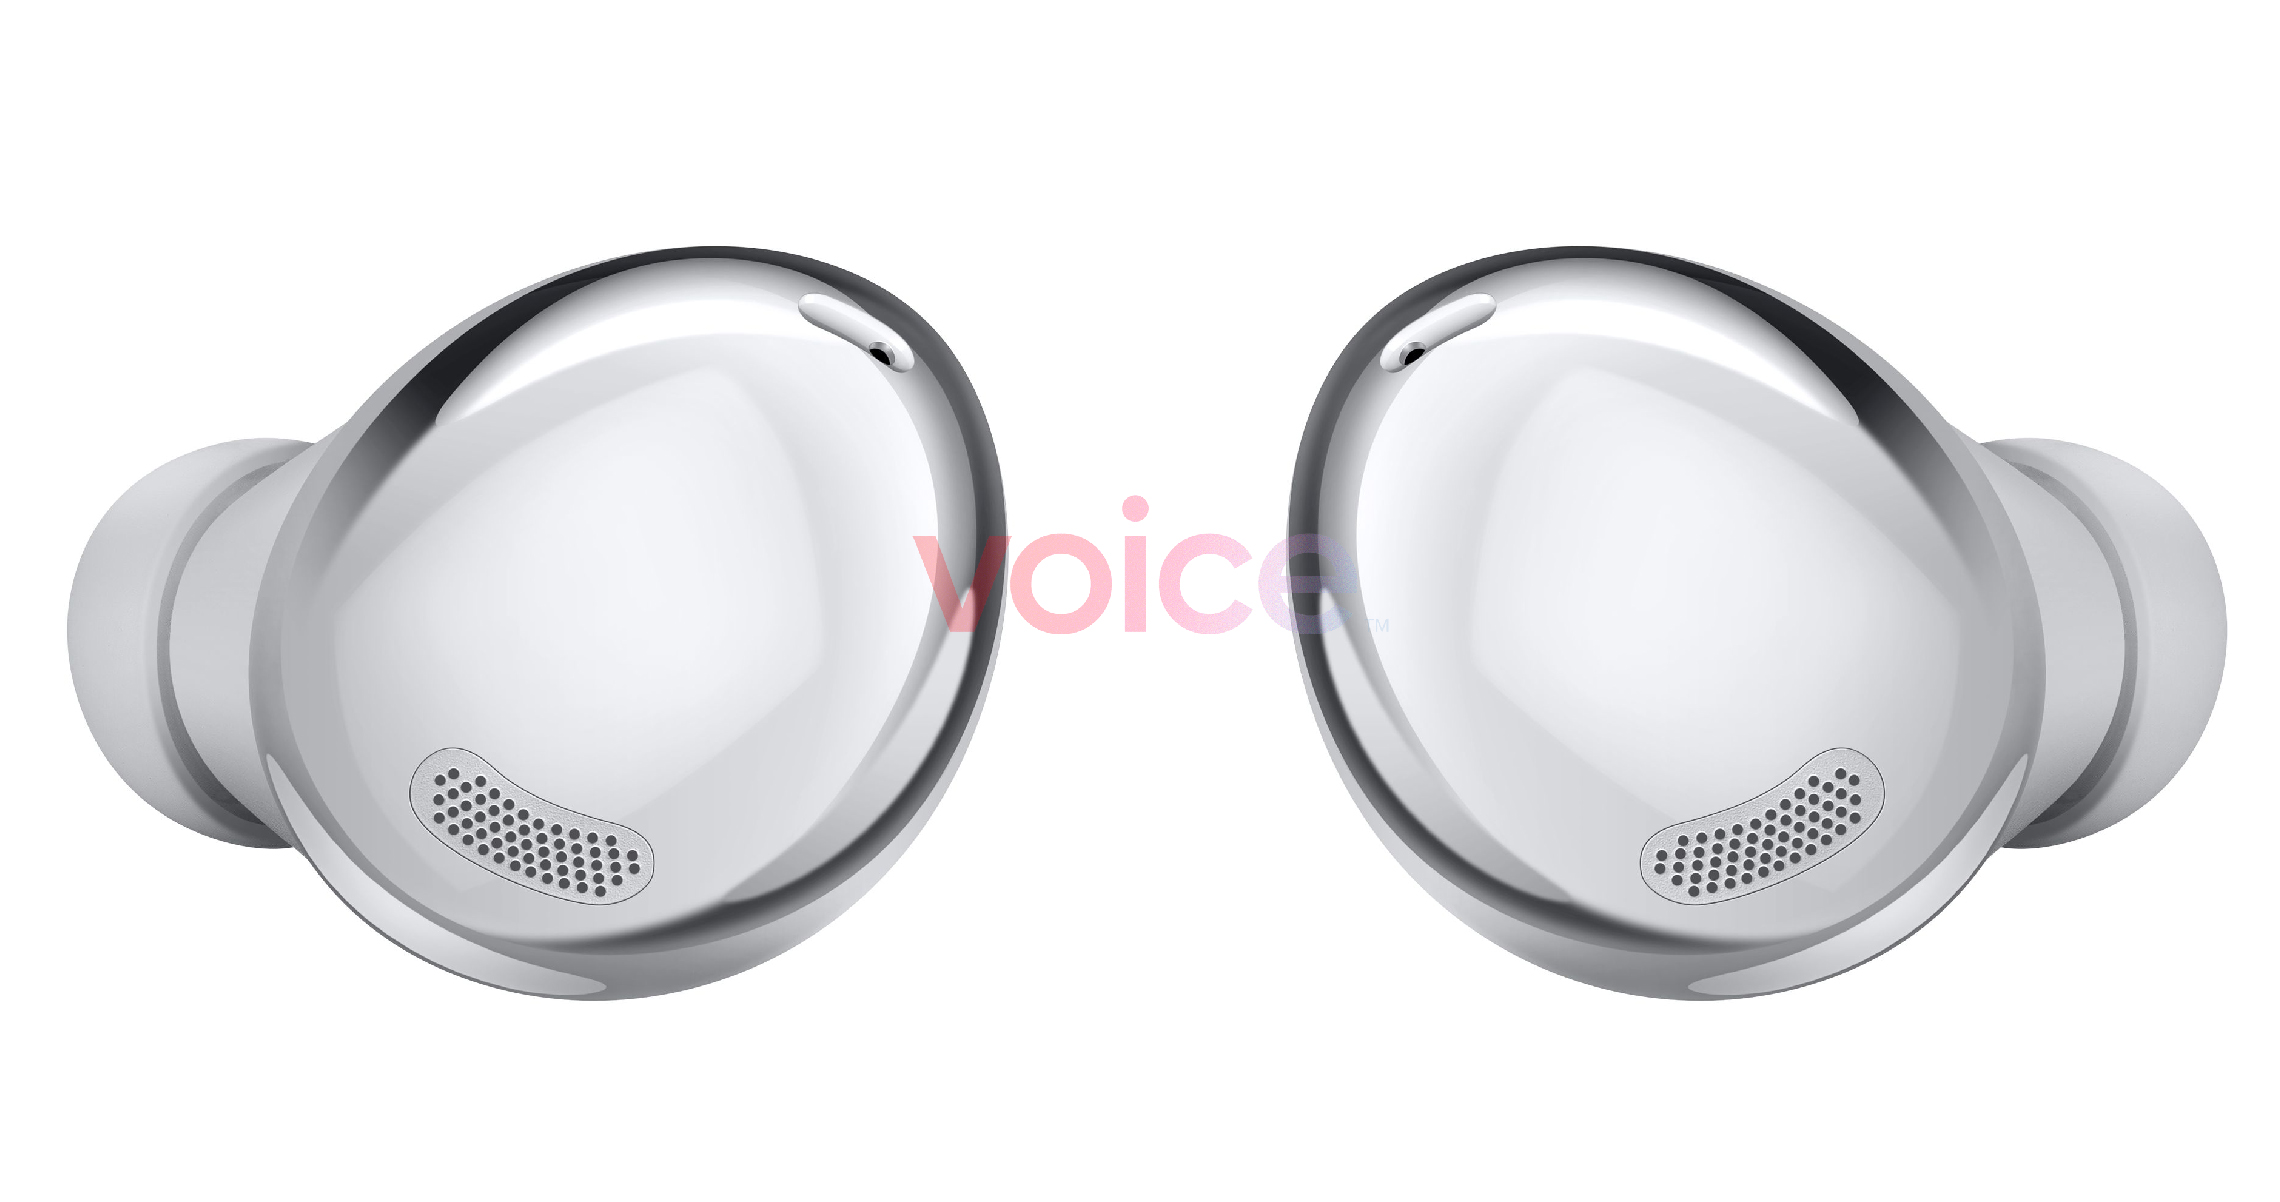 Galaxy Buds Pro design shown in first leaked images - 9to5Google